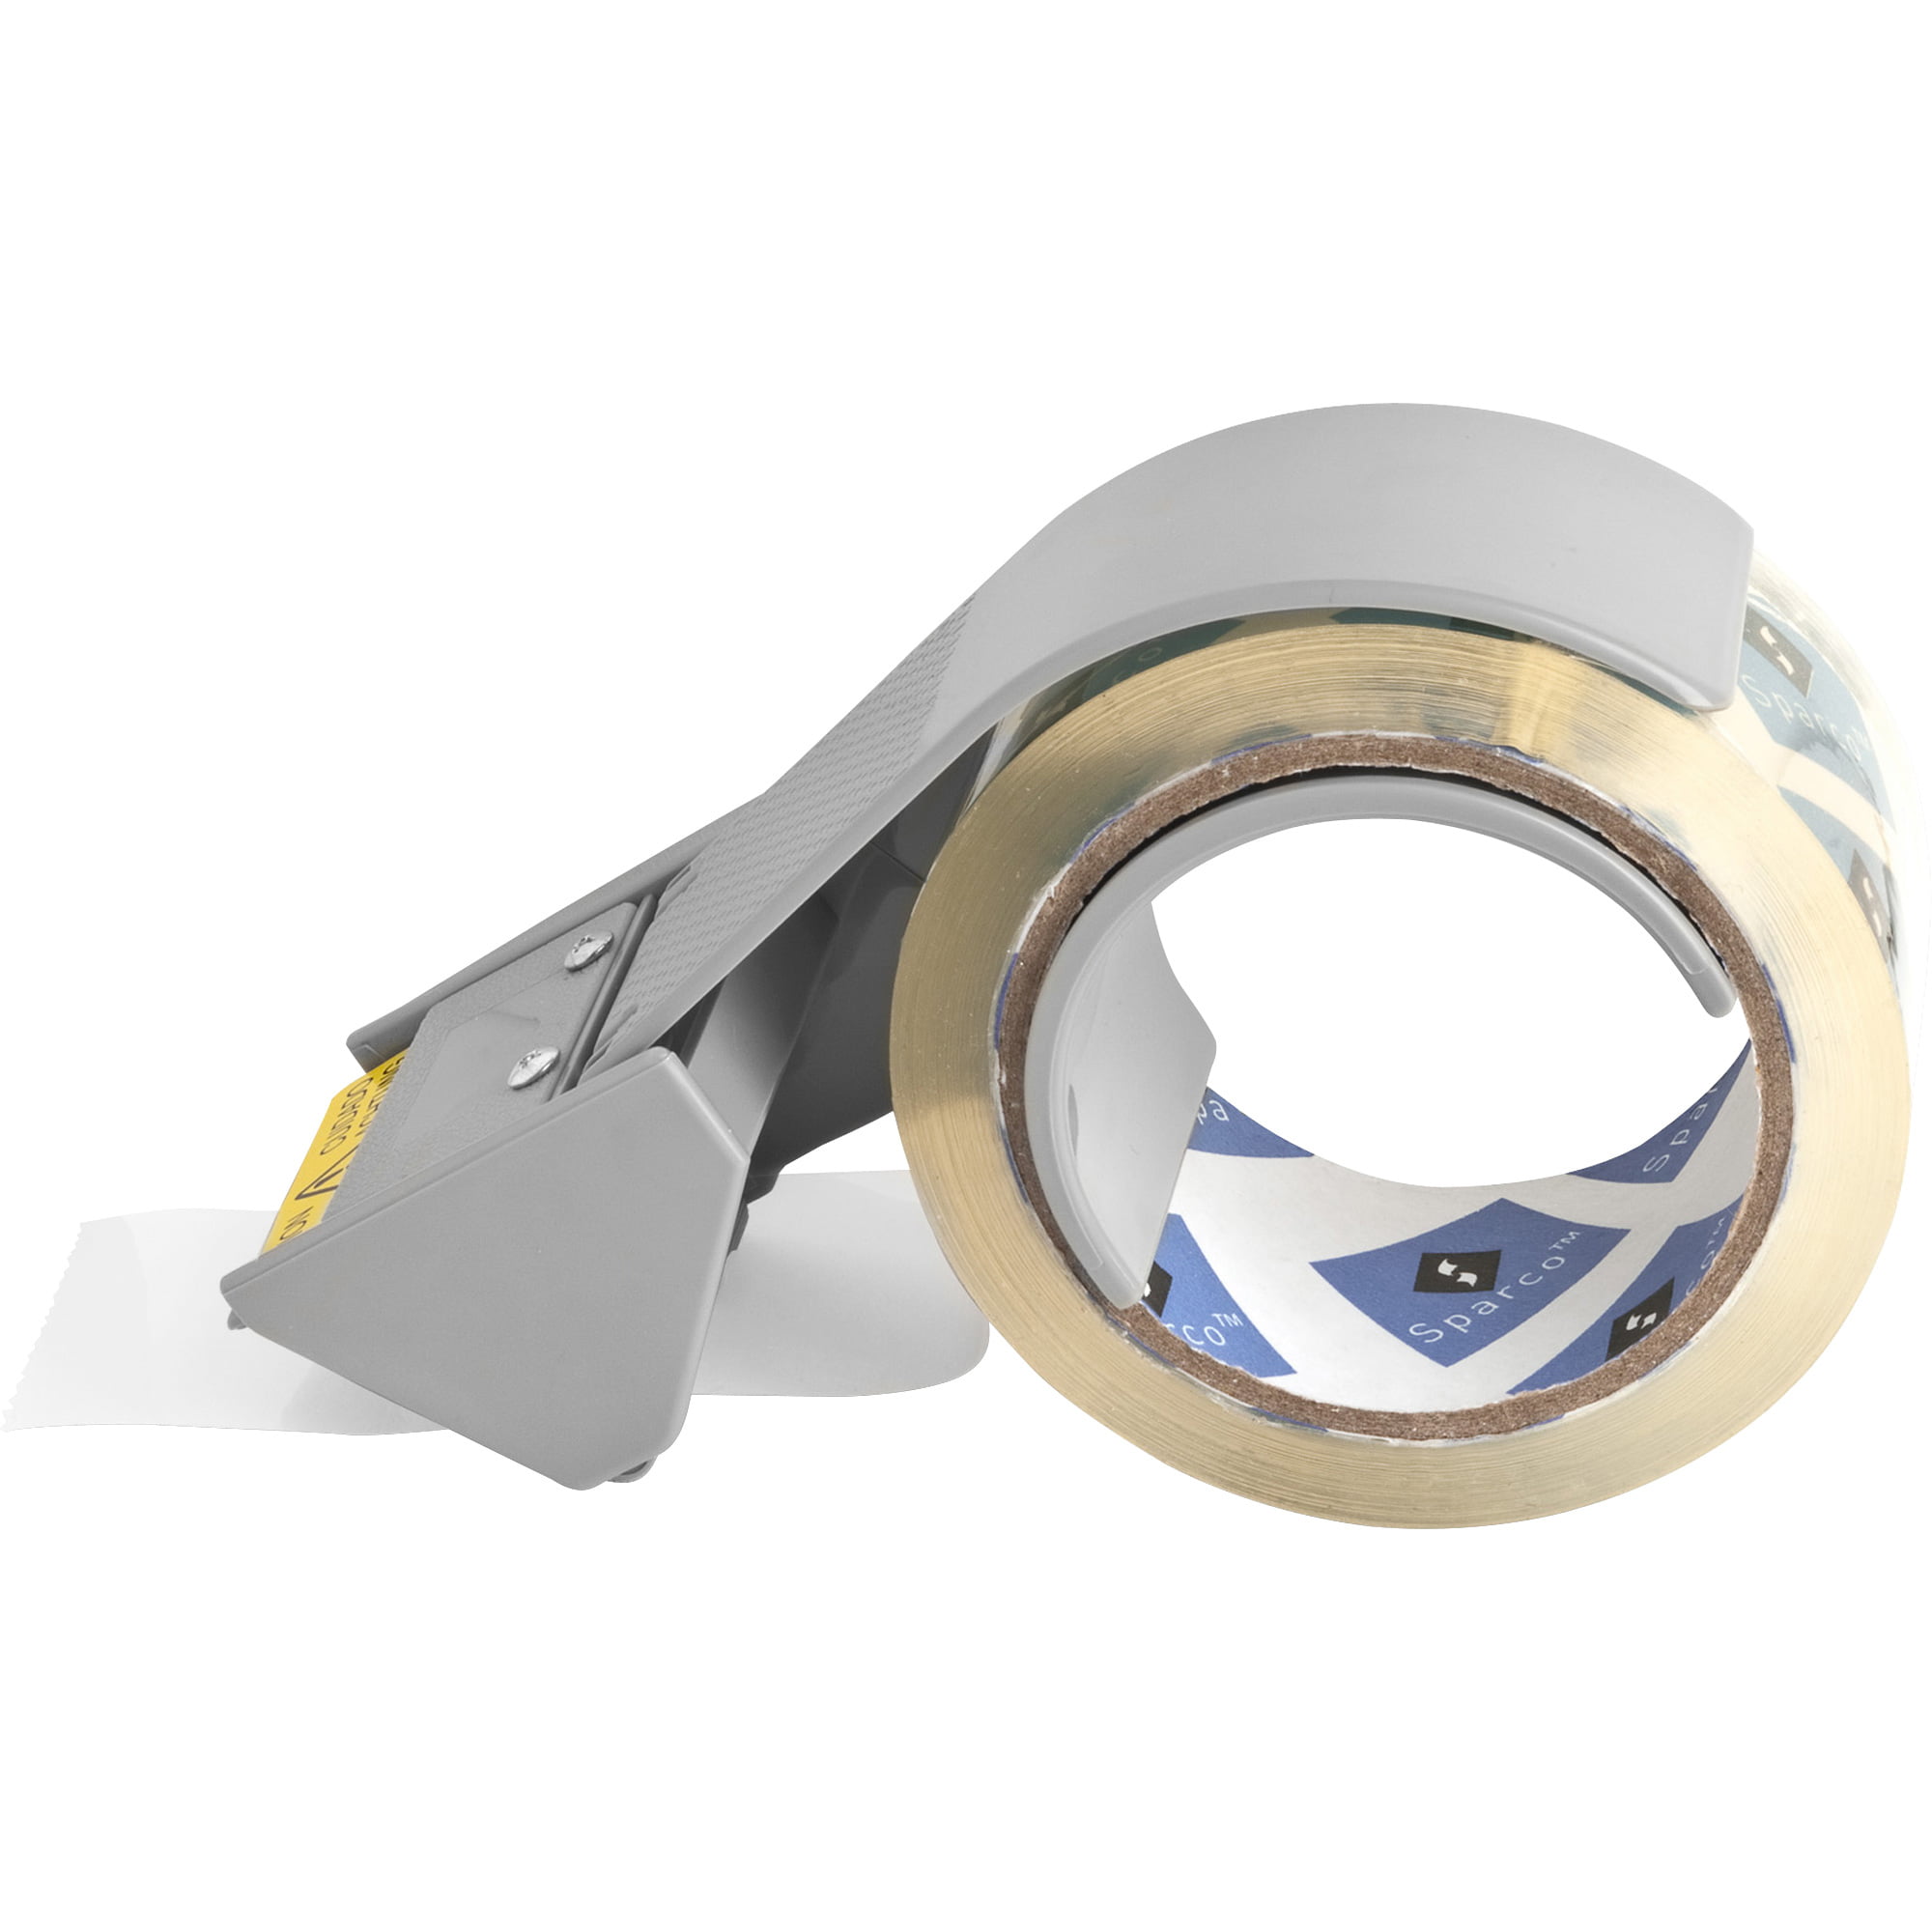 Sparco Package Sealing Tape Dispenser #01752 